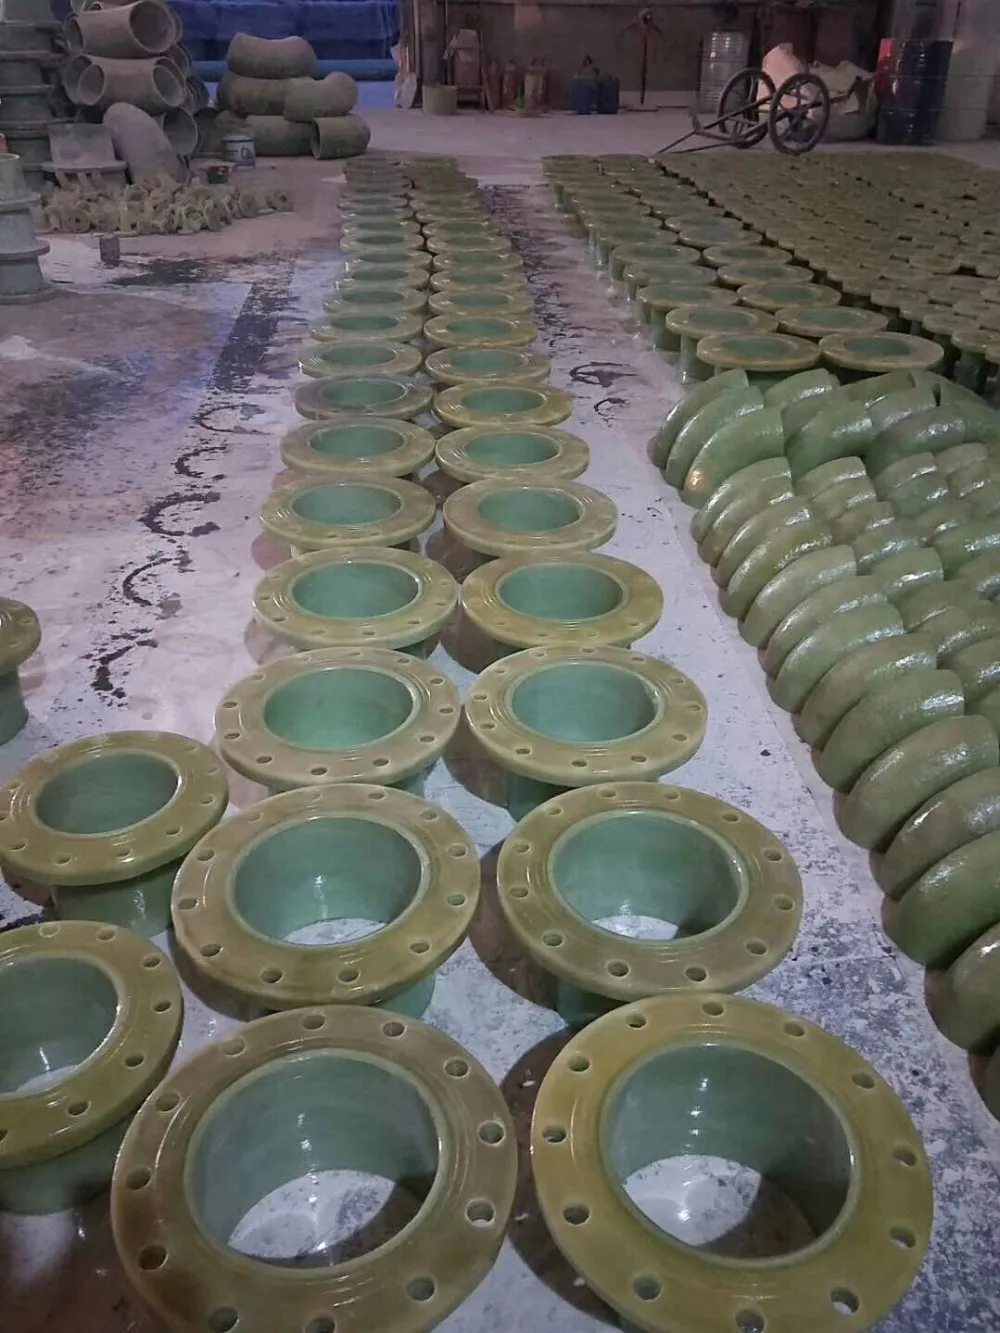 Grp Frp Fiberglass Flanges For Pipe Connection And Coupling,Frp Grp Gre